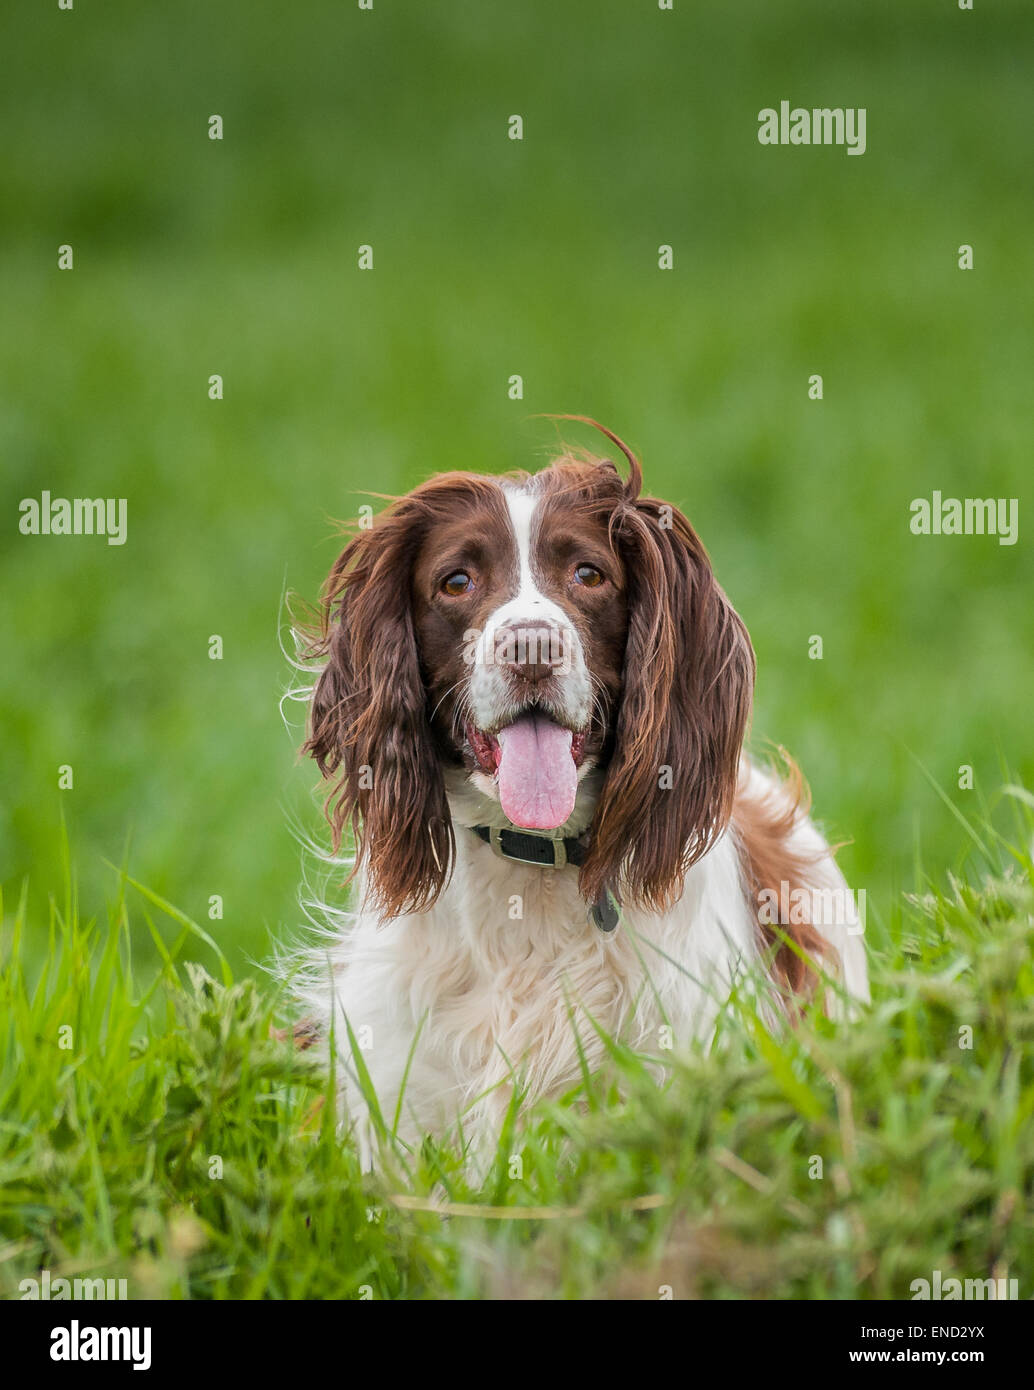 English Springer Spaniel dog in a grass field Stock Photo